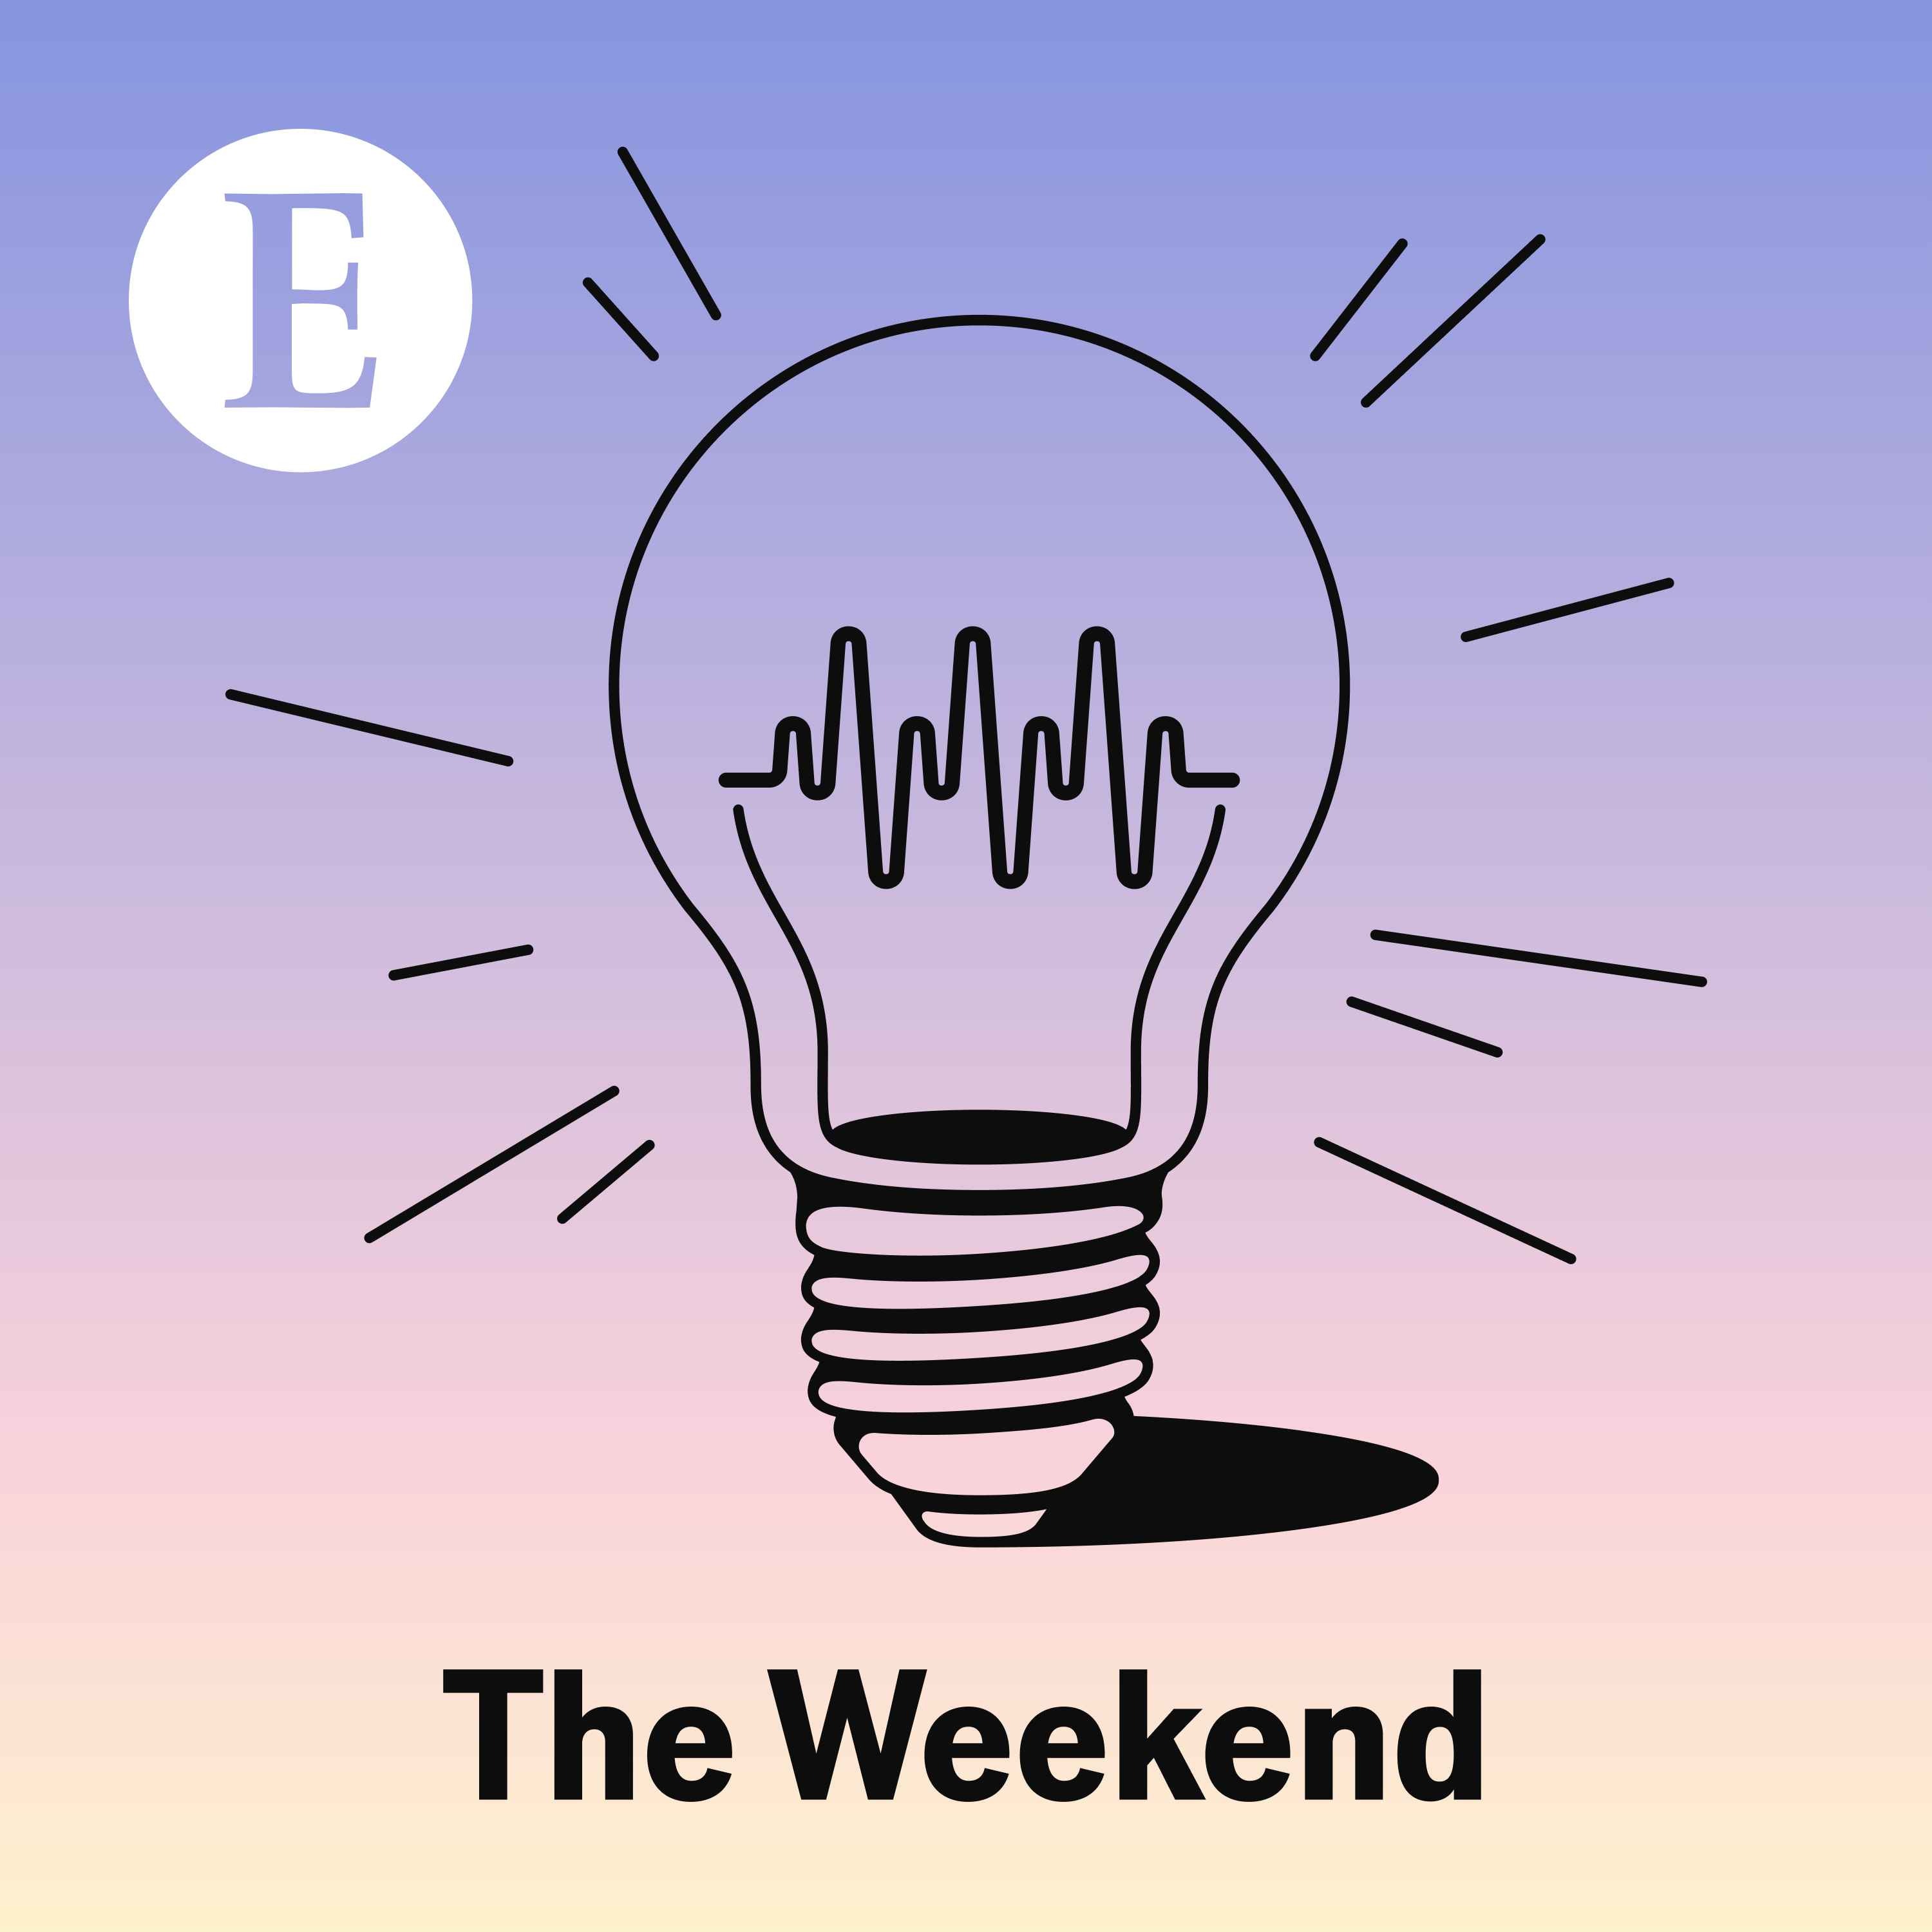 The Weekend Intelligence: Life and fate